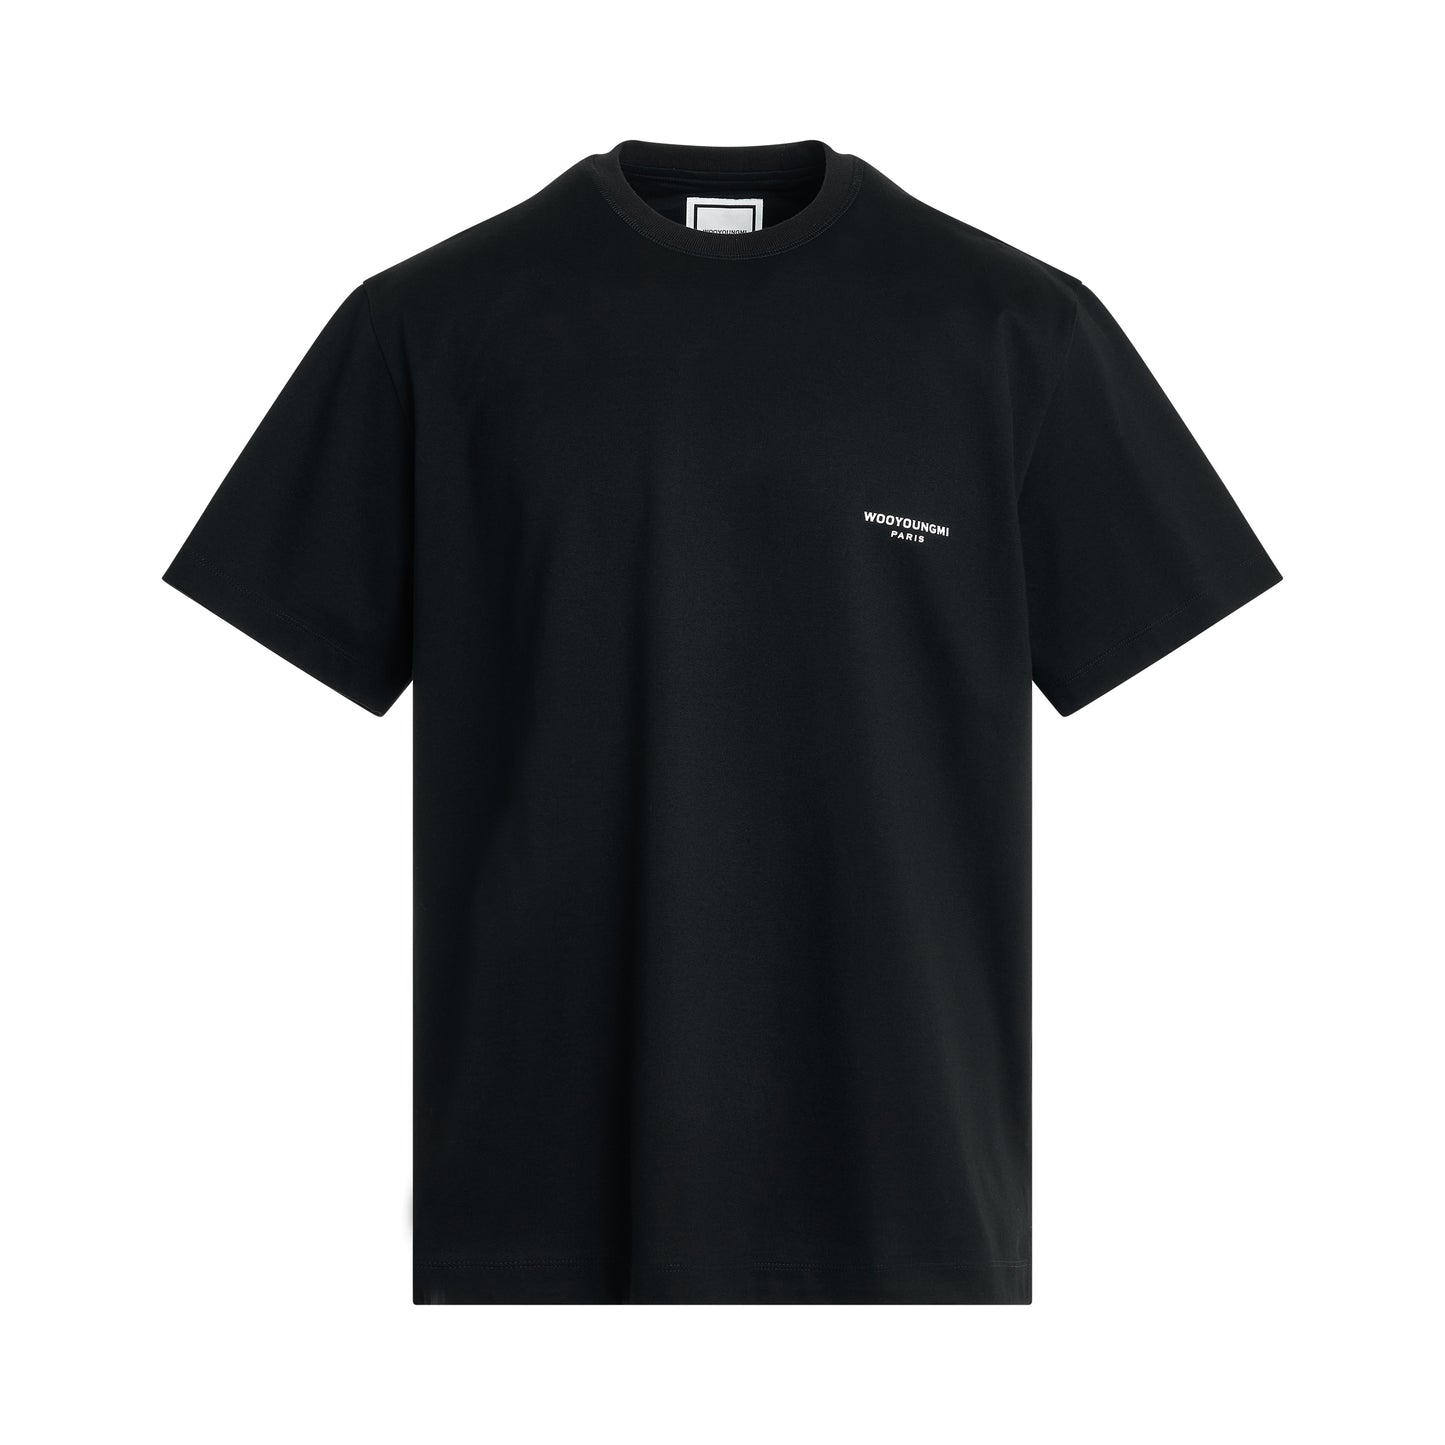 Square Patch Logo T-Shirt in Black